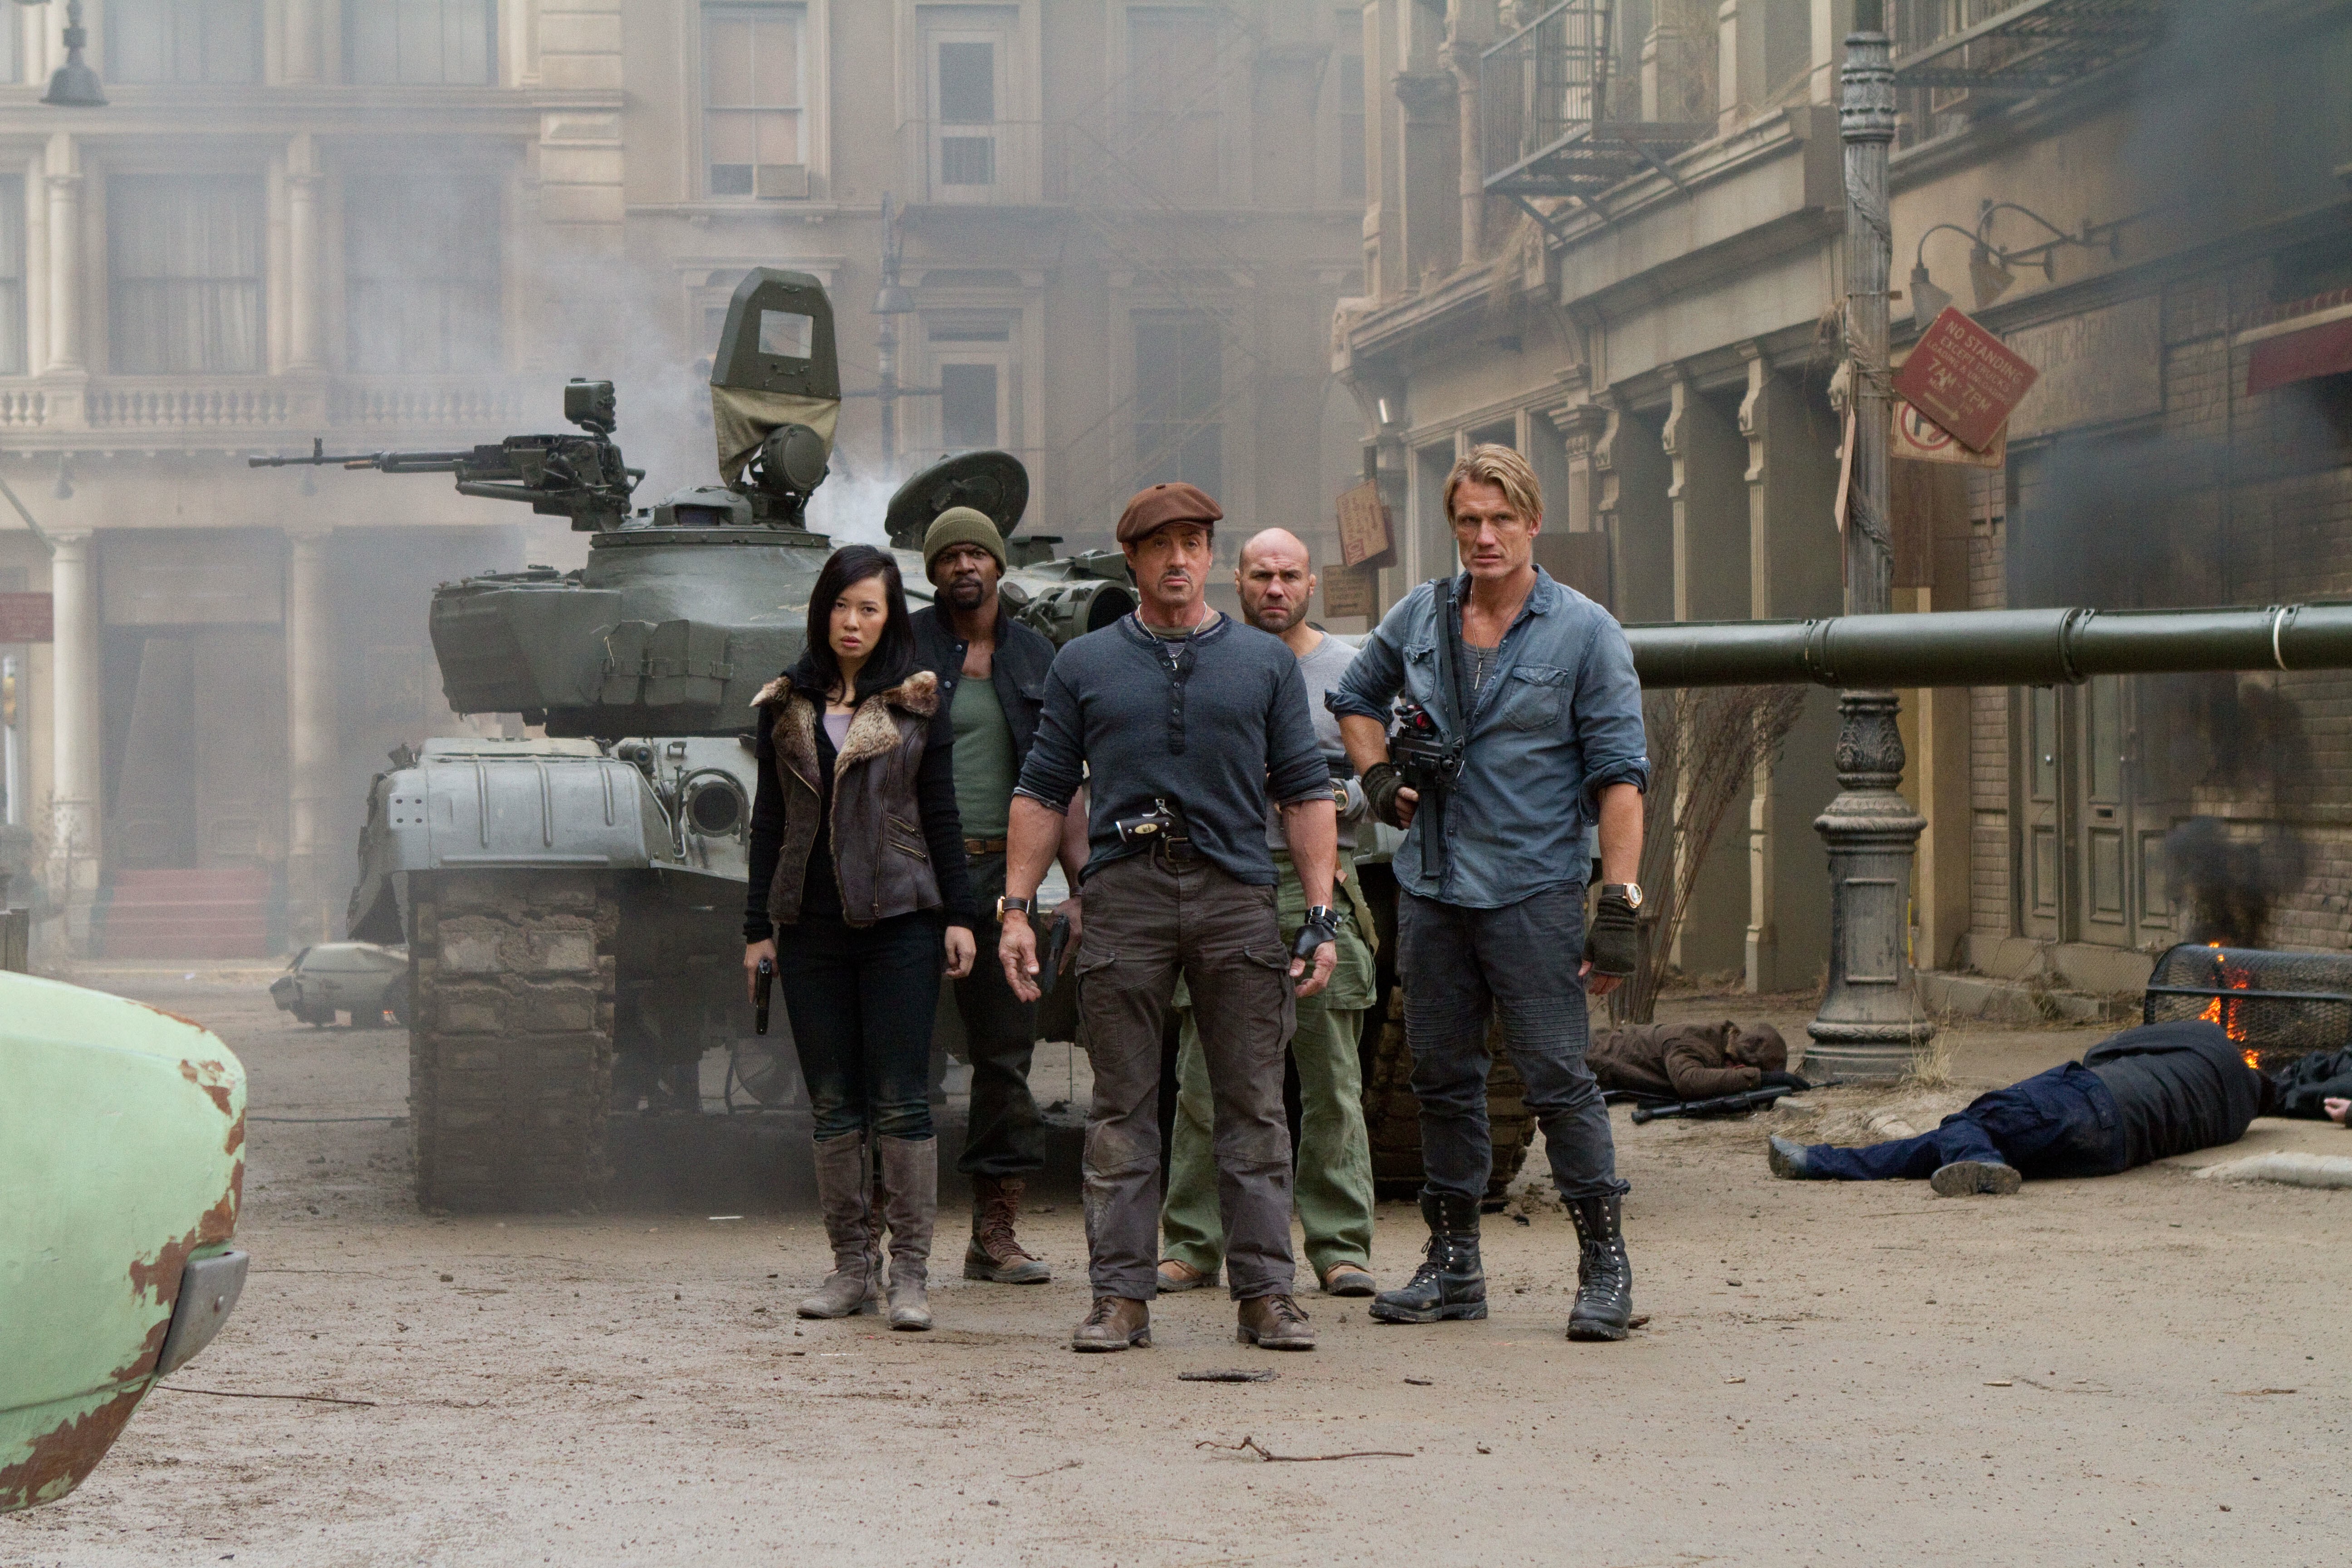 movie, the expendables 2, barney ross, dolph lundgren, gunnar jensen, hale caesar, maggie (the expendables), nan yu, randy couture, sylvester stallone, terry crews, toll road, the expendables High Definition image